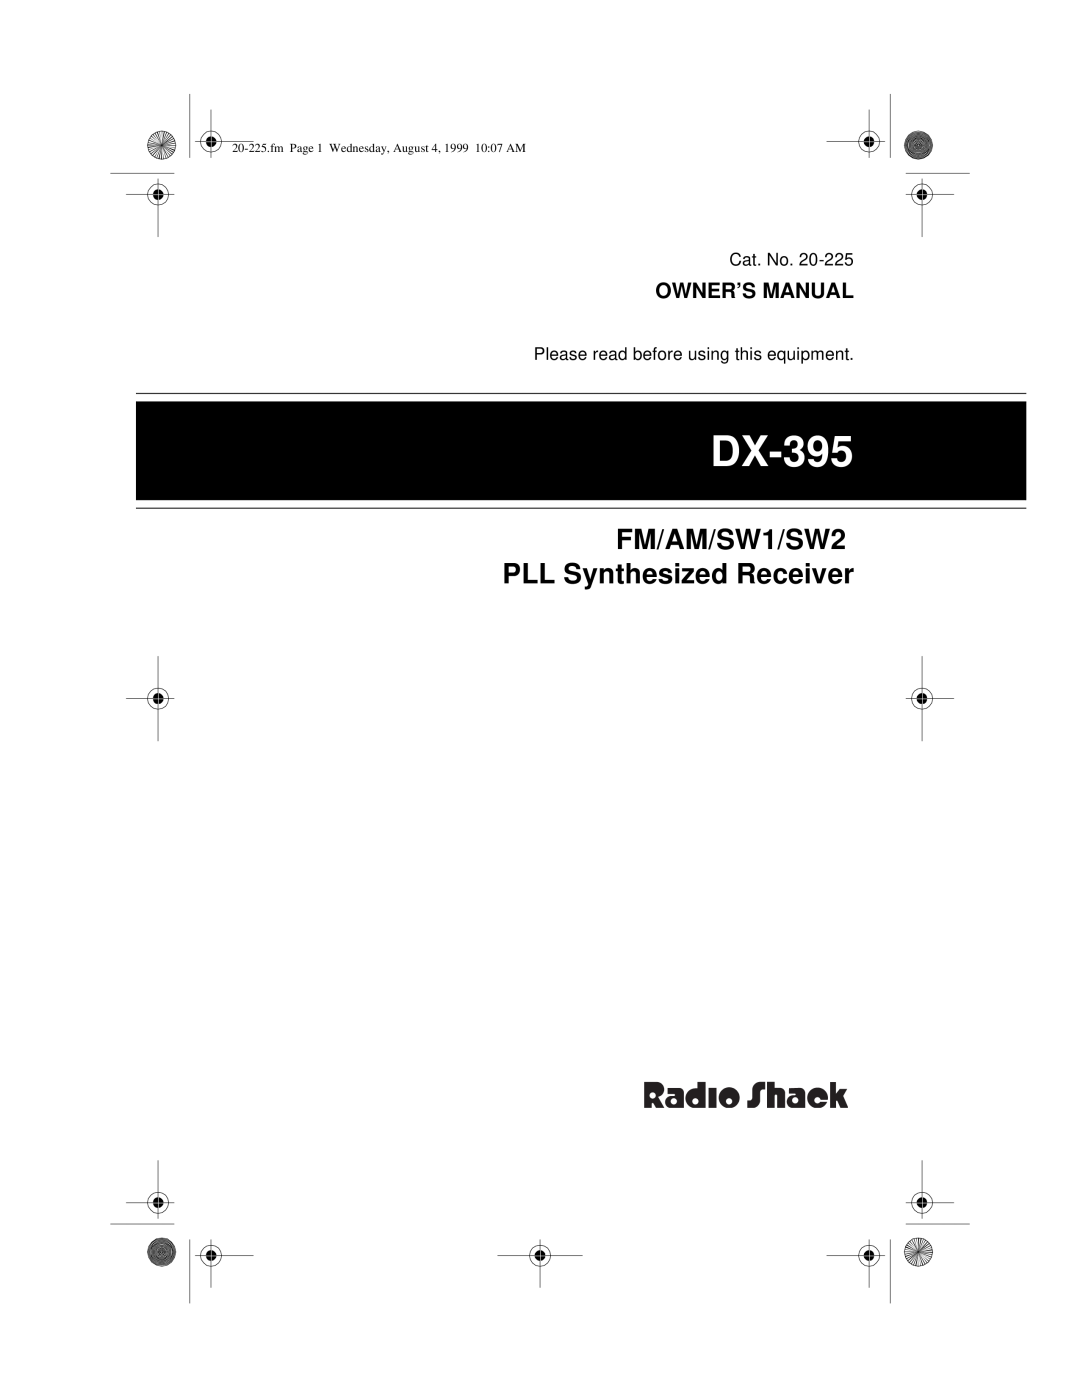 Radio Shack DX-395 owner manual FM/AM/SW1/SW2 PLL Synthesized Receiver 